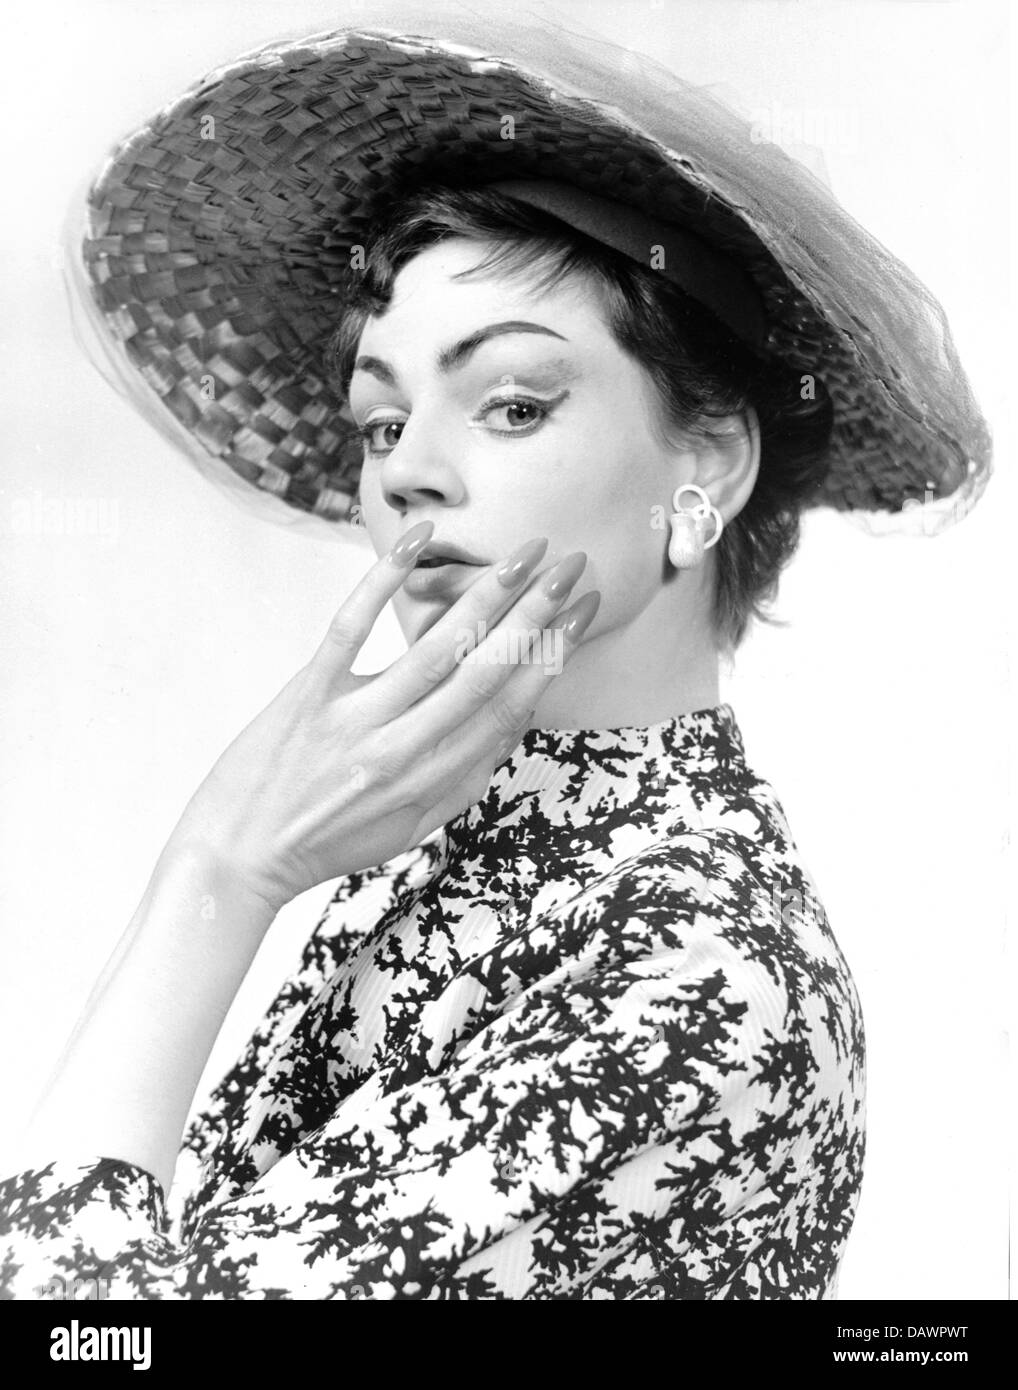 fashion, ladies' fashion, woman with straw hat, 1956, Additional-Rights-Clearences-Not Available Stock Photo